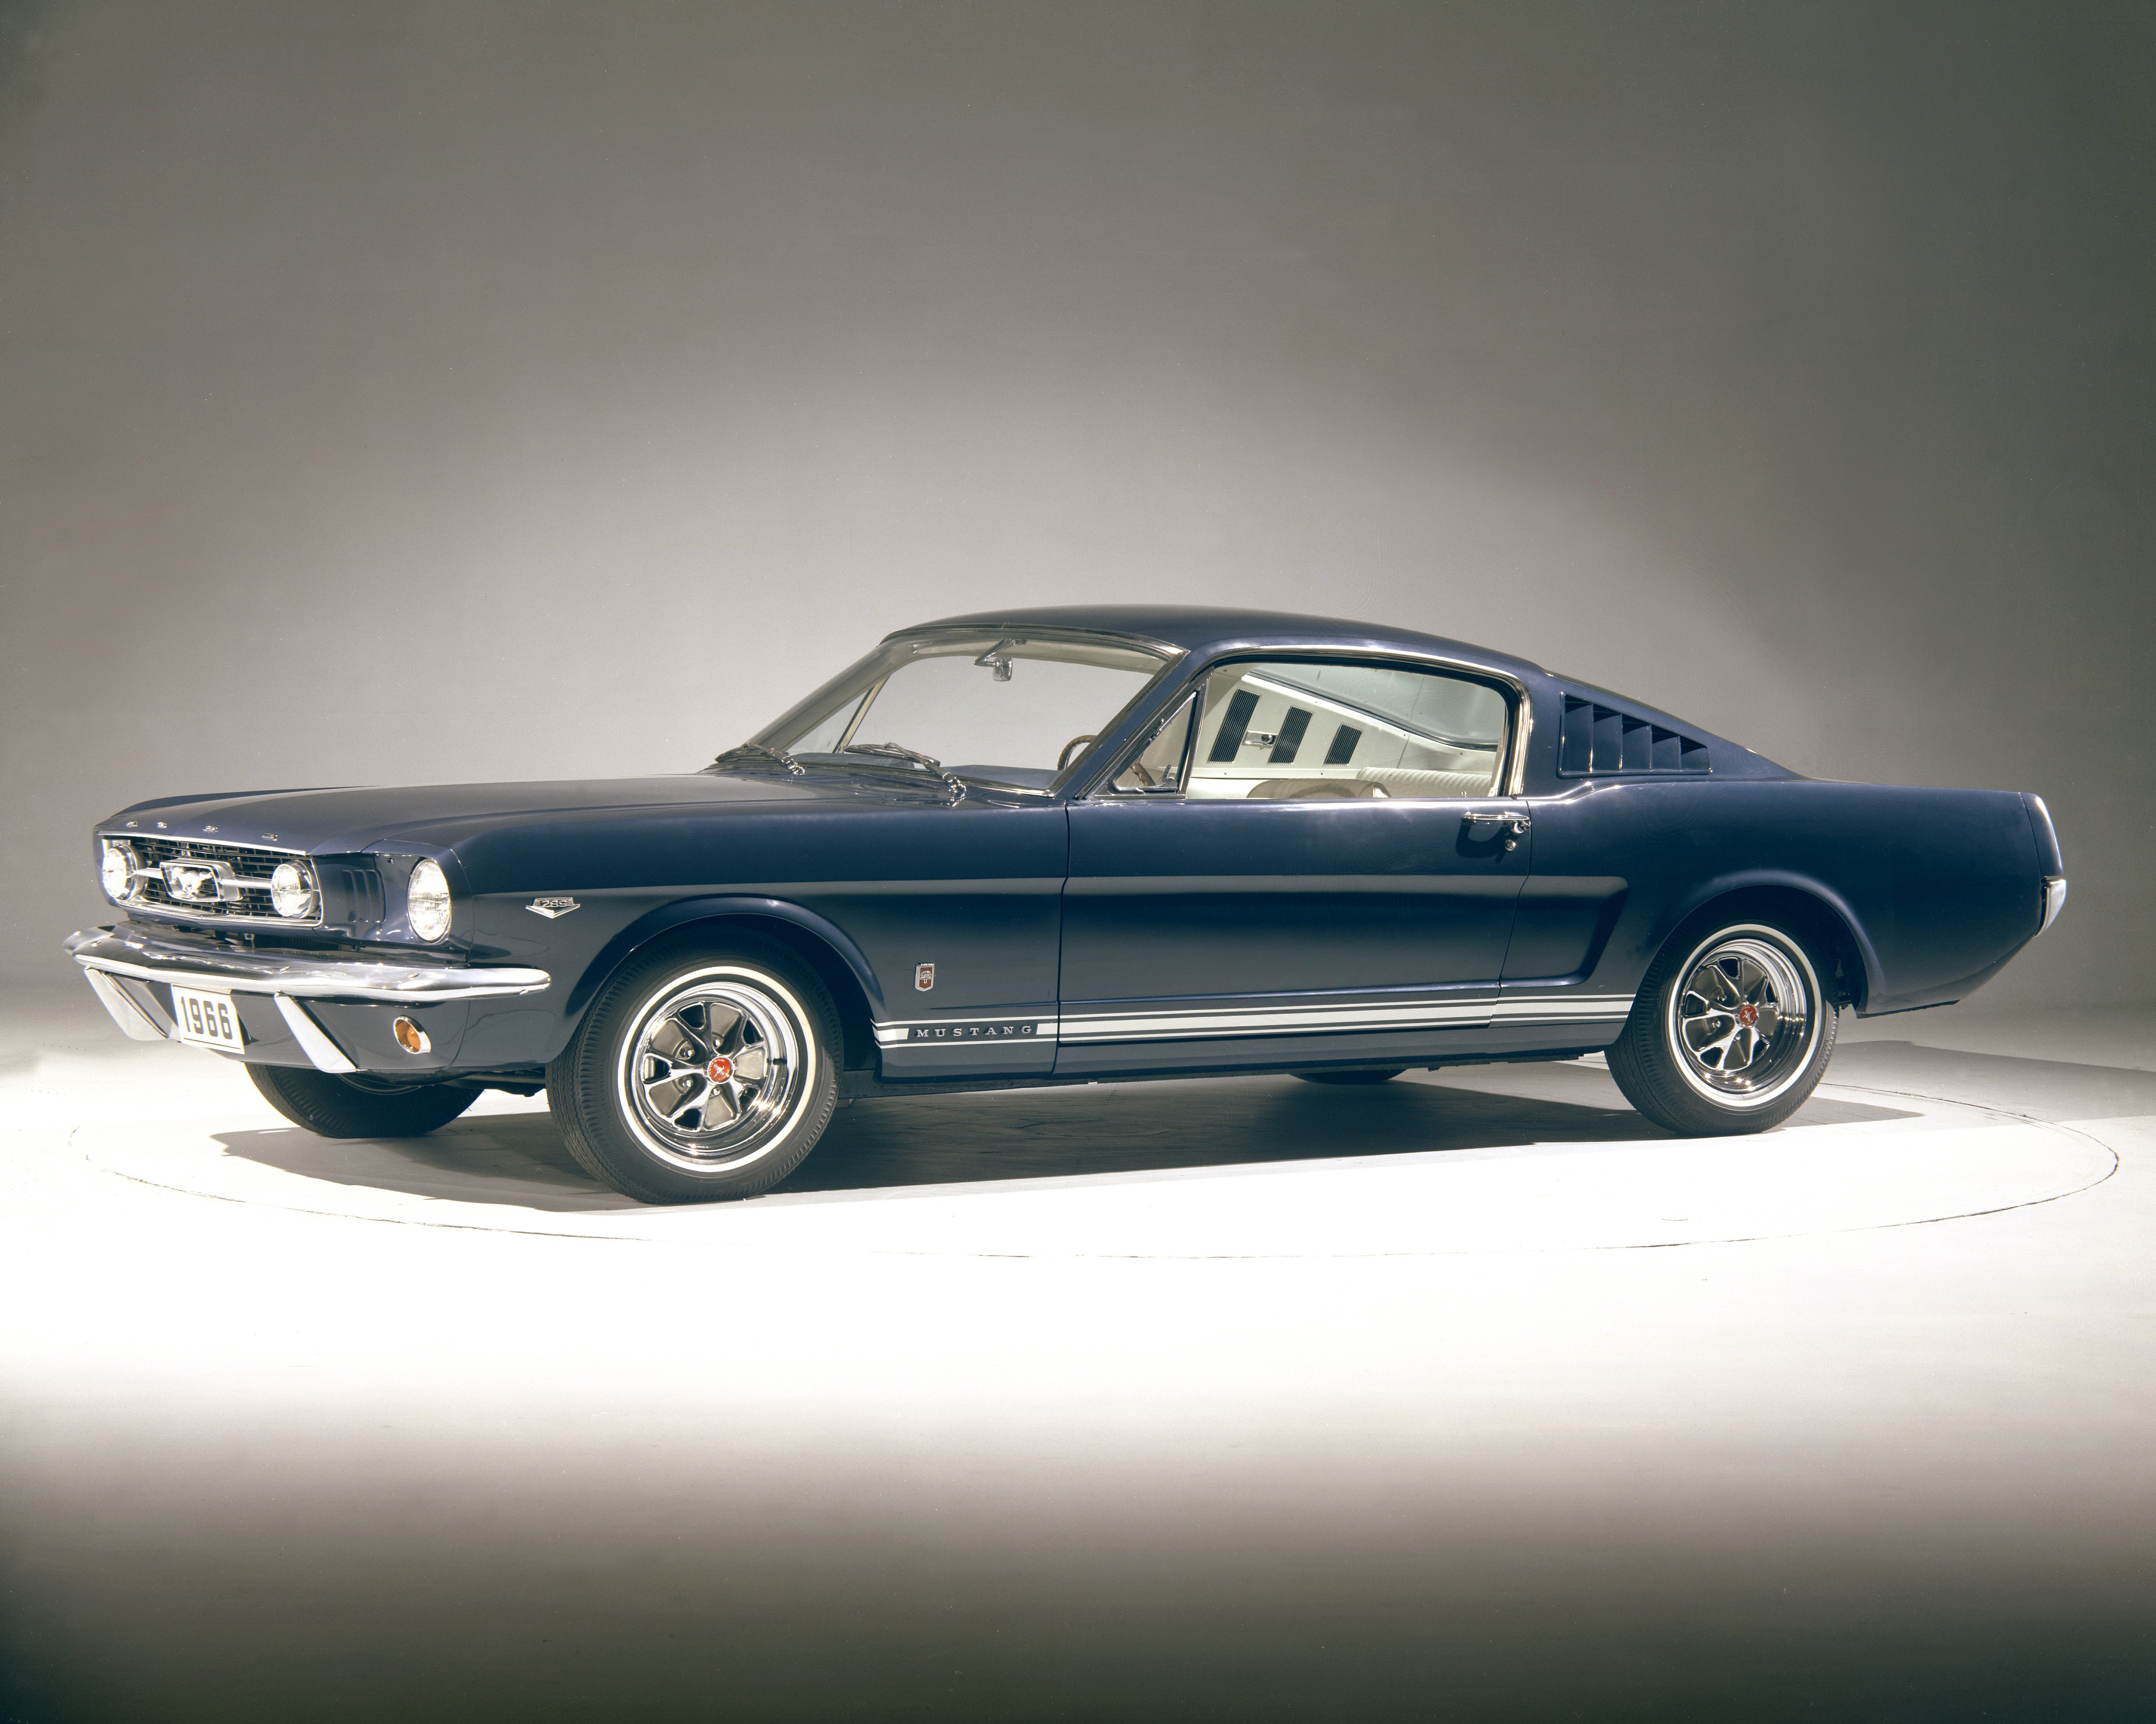 vehicles, ford mustang fastback, fastback, ford mustang, muscle car, ford